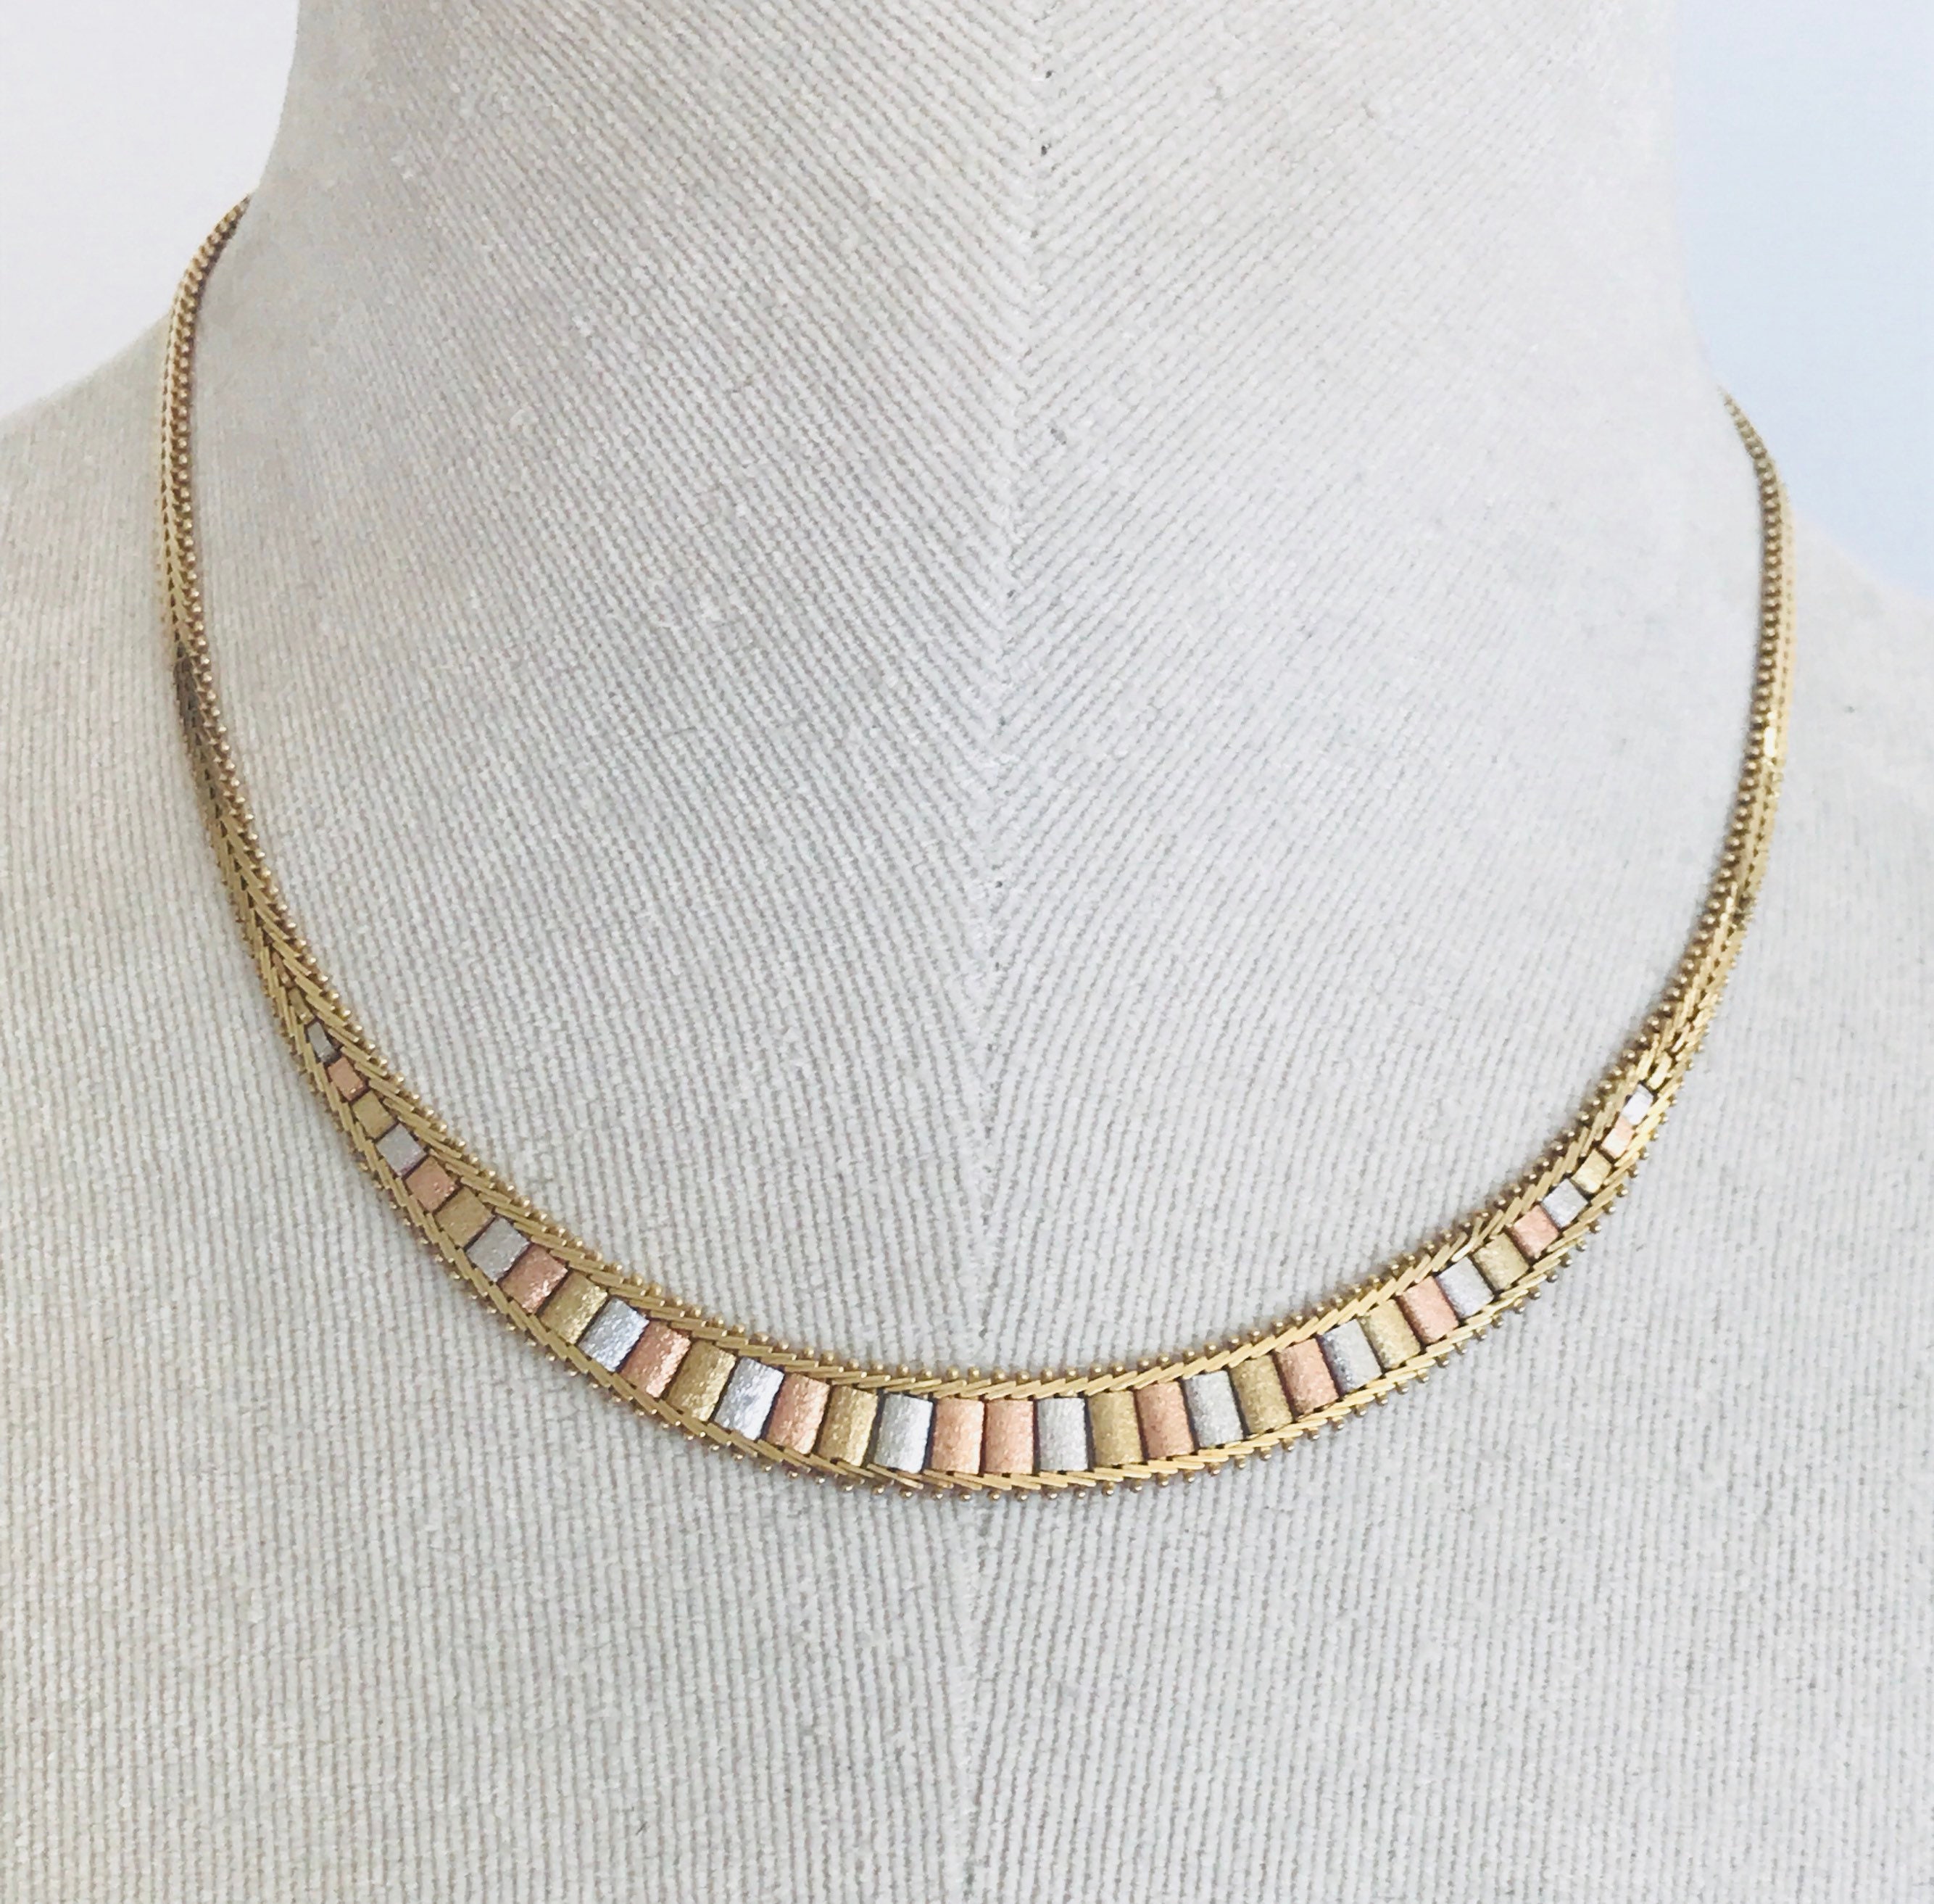 MOM Necklace in 14k Gold